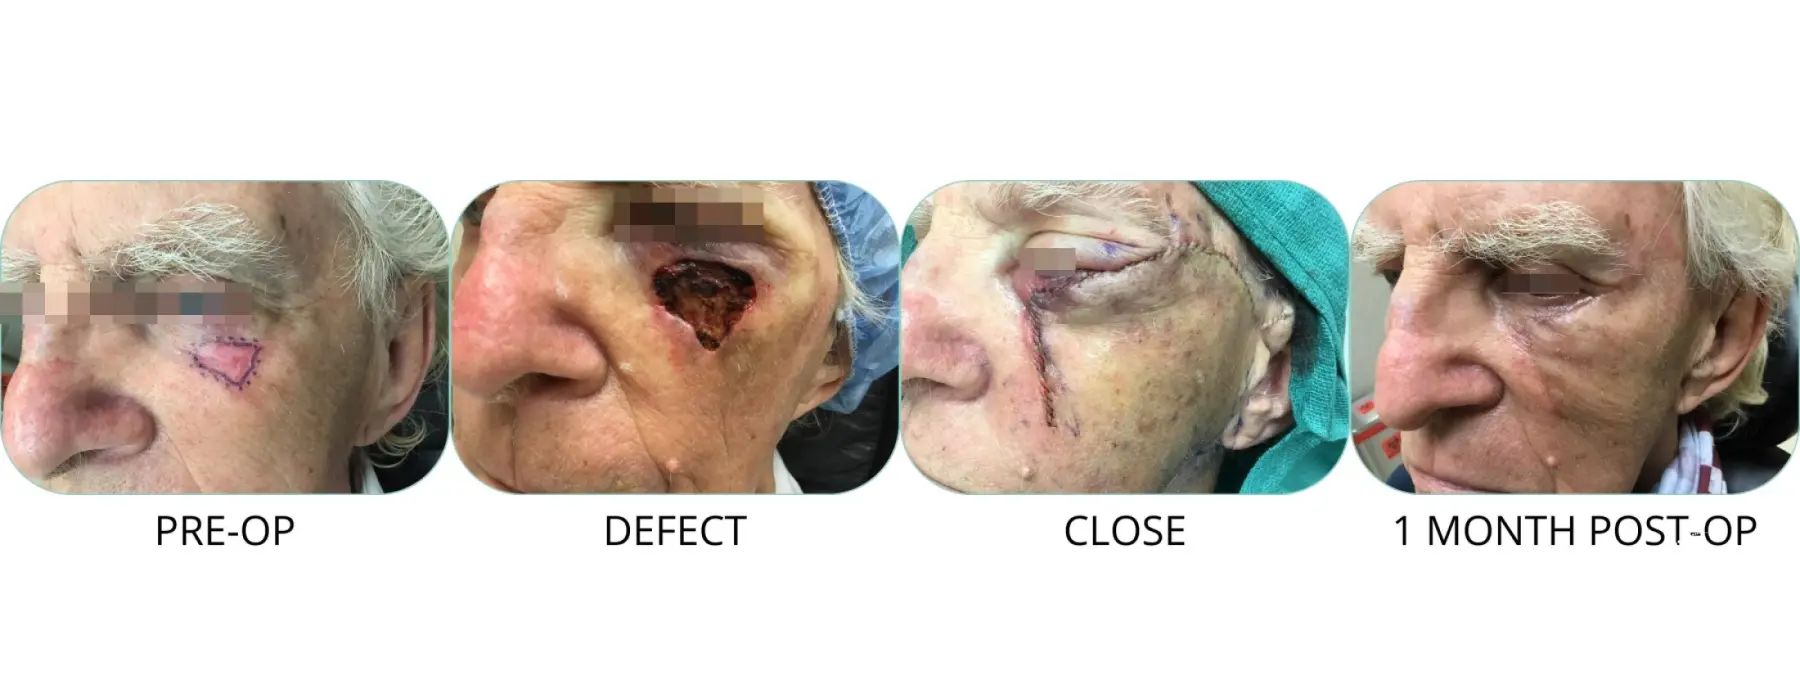 Basal Cell skin cancer under eye Mohs surgery - Before and After 1